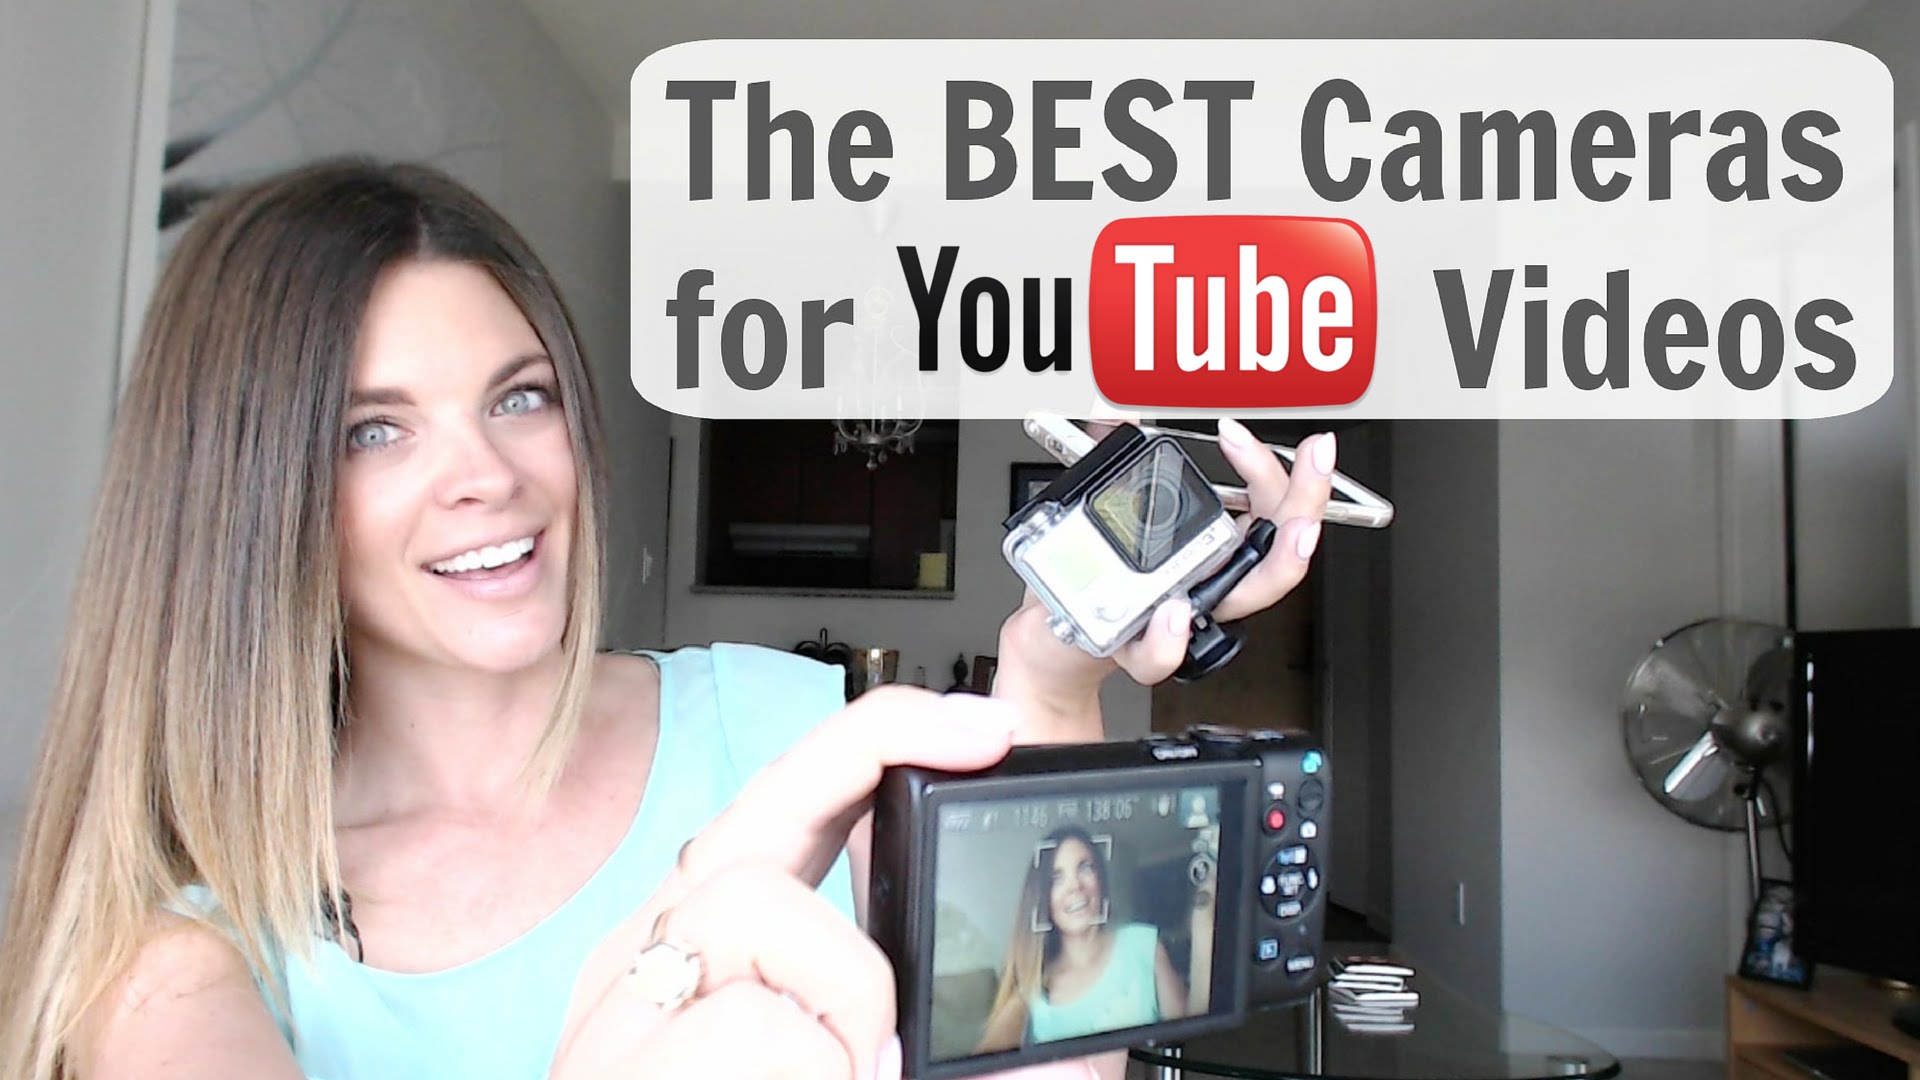 Video Camera Review 2015: Best Camera for YouTube